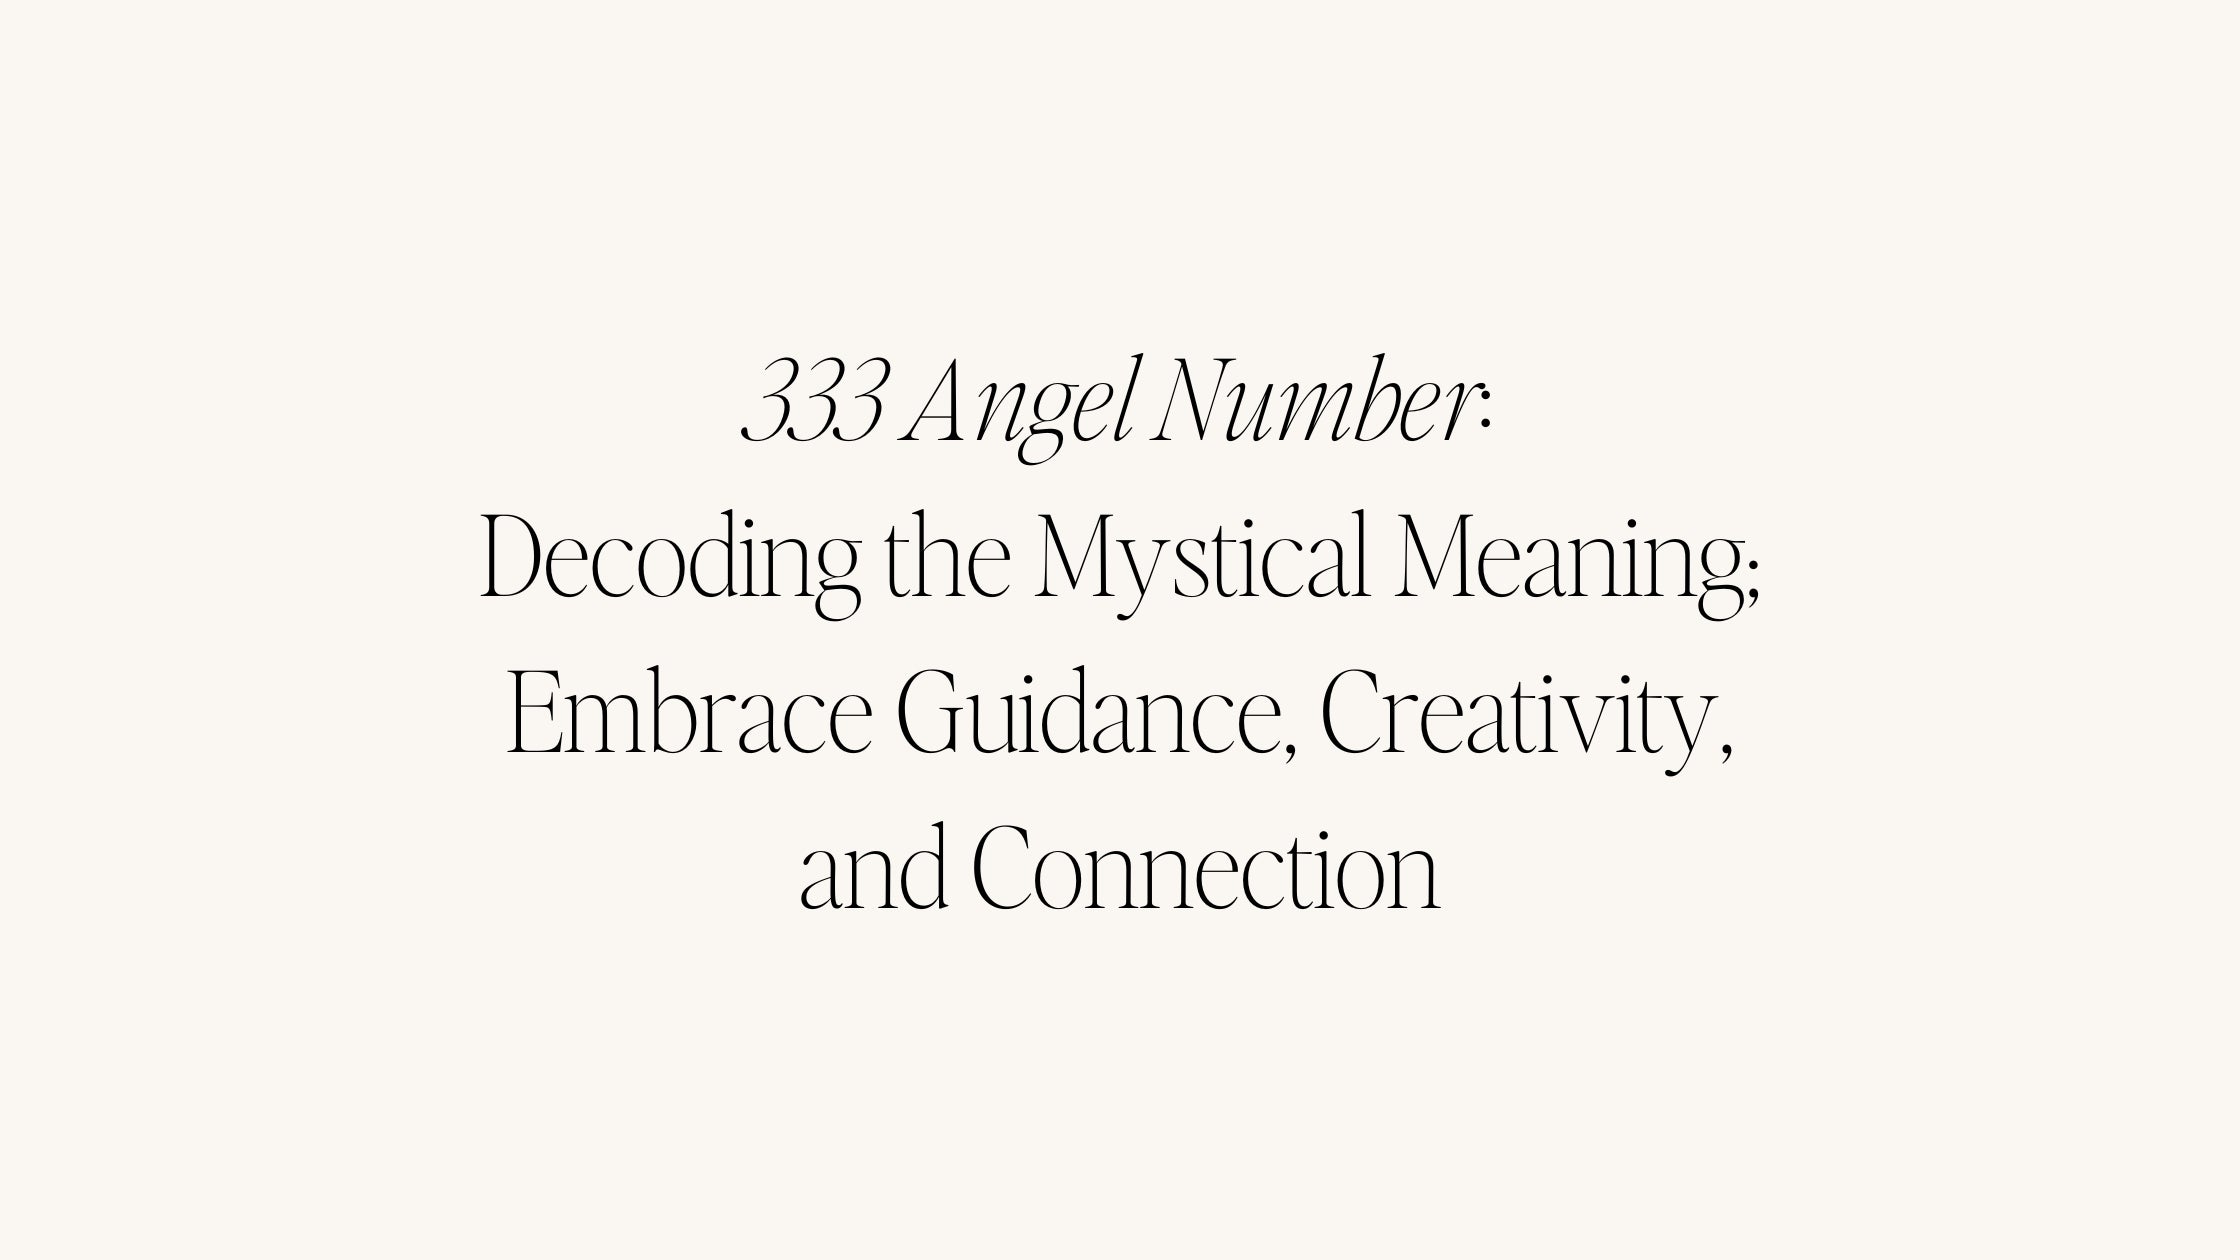 333 Angel Number Meaning: Embrace Guidance, Creativity, and Connection